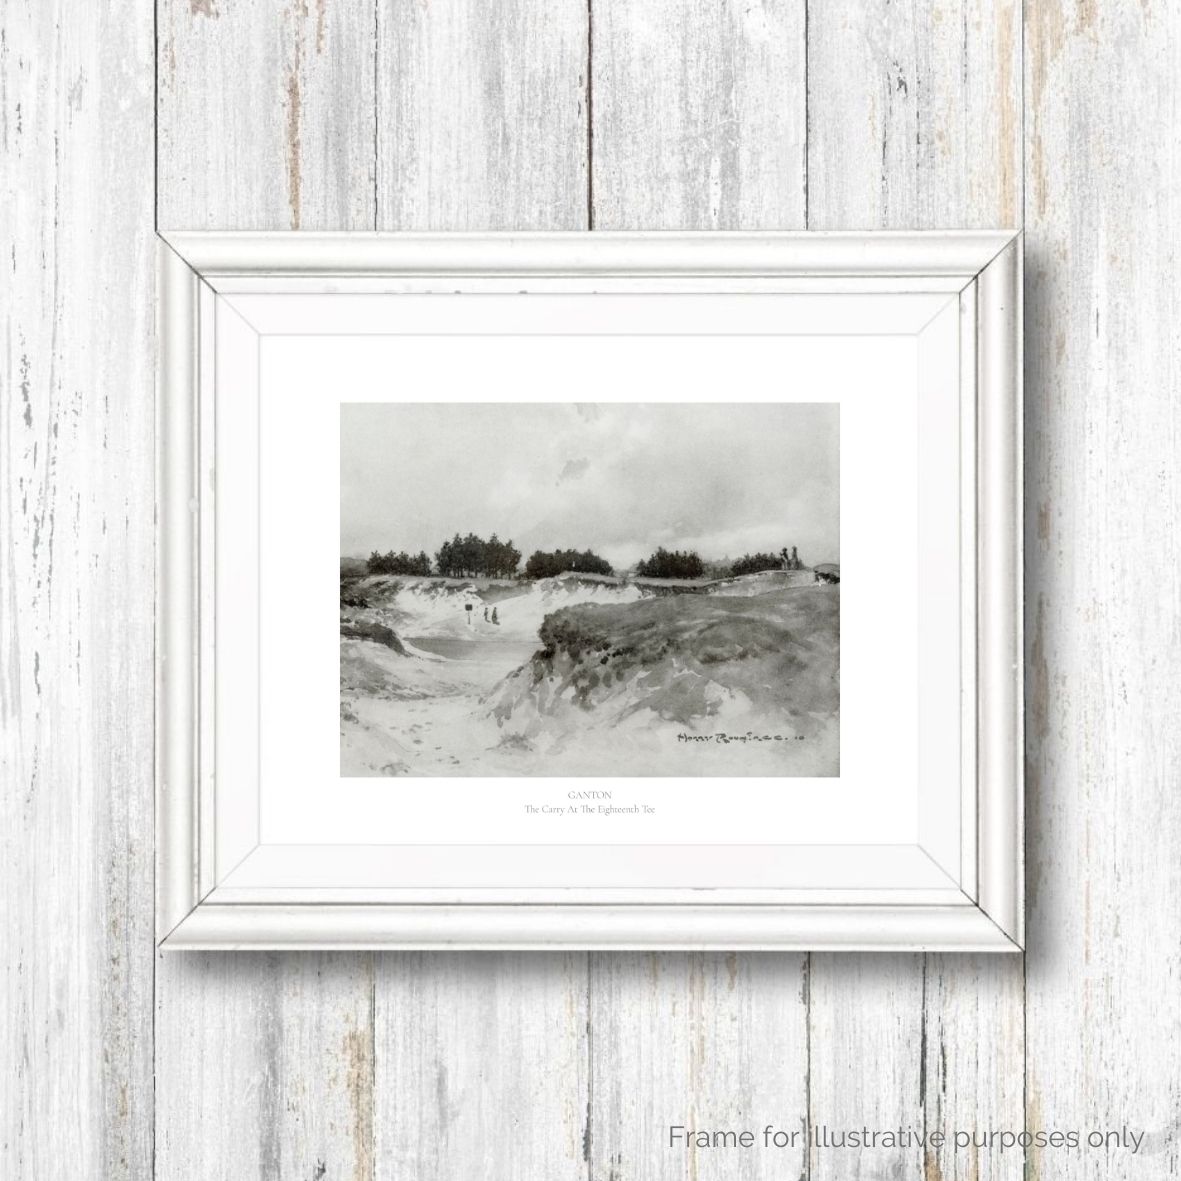 Framed print of Ganton Golf Course with text